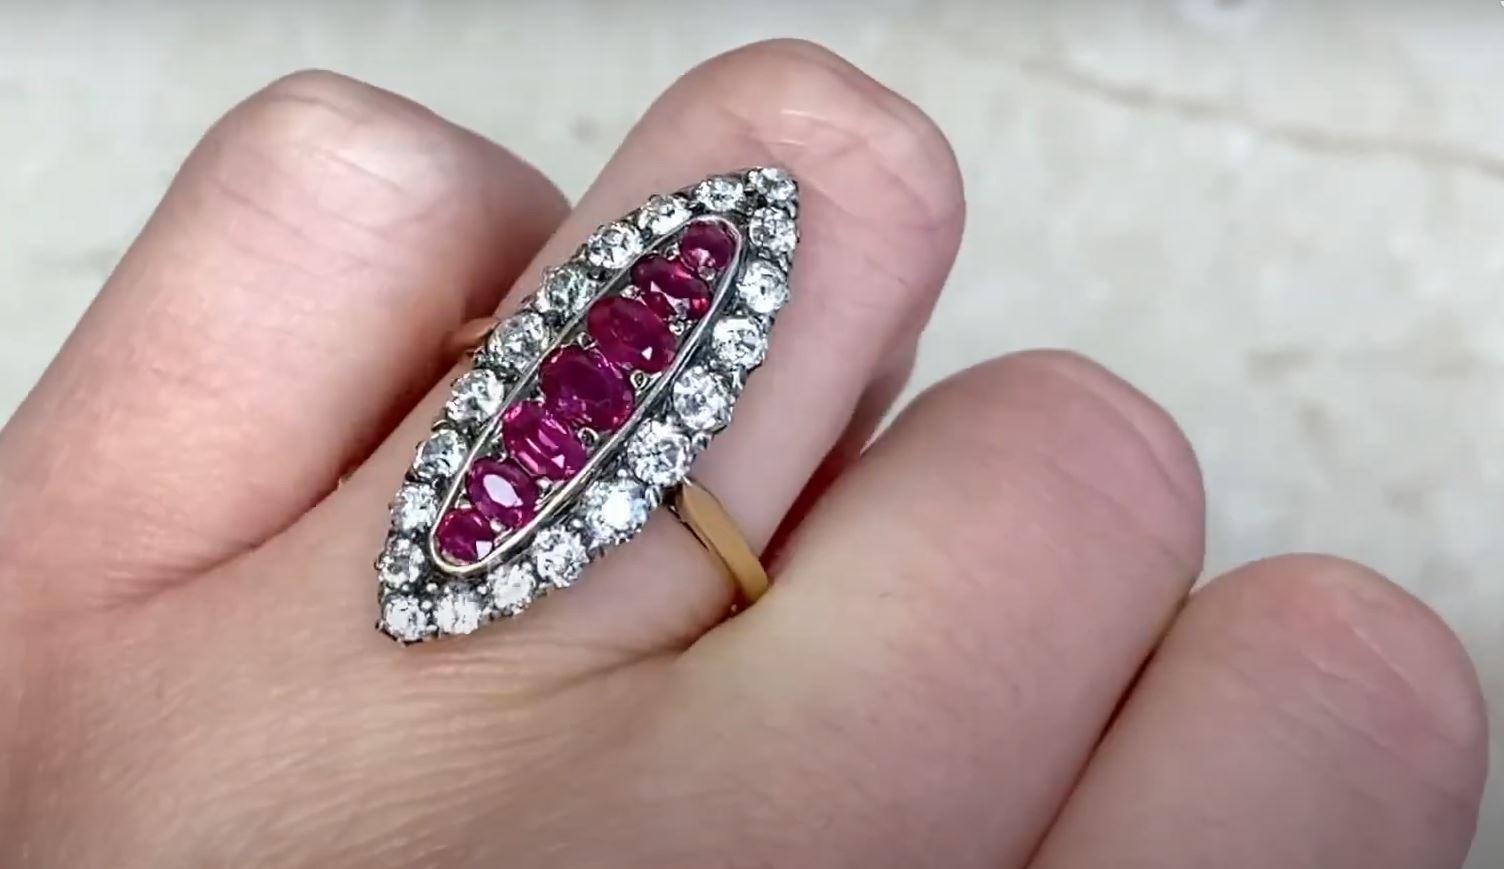 Antique 1.0ct Oval Cut Burmese Ruby Cocktail Ring, Diamond Halo, 18k Yellow Gold For Sale 4